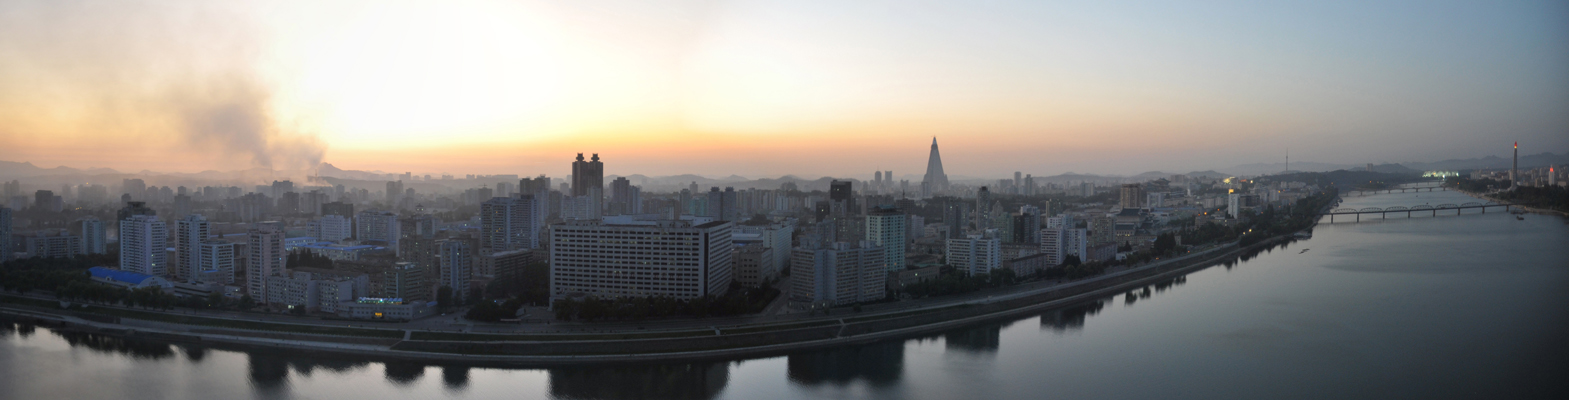 Panorama of the west bank of the Taedong River, Pyongyang